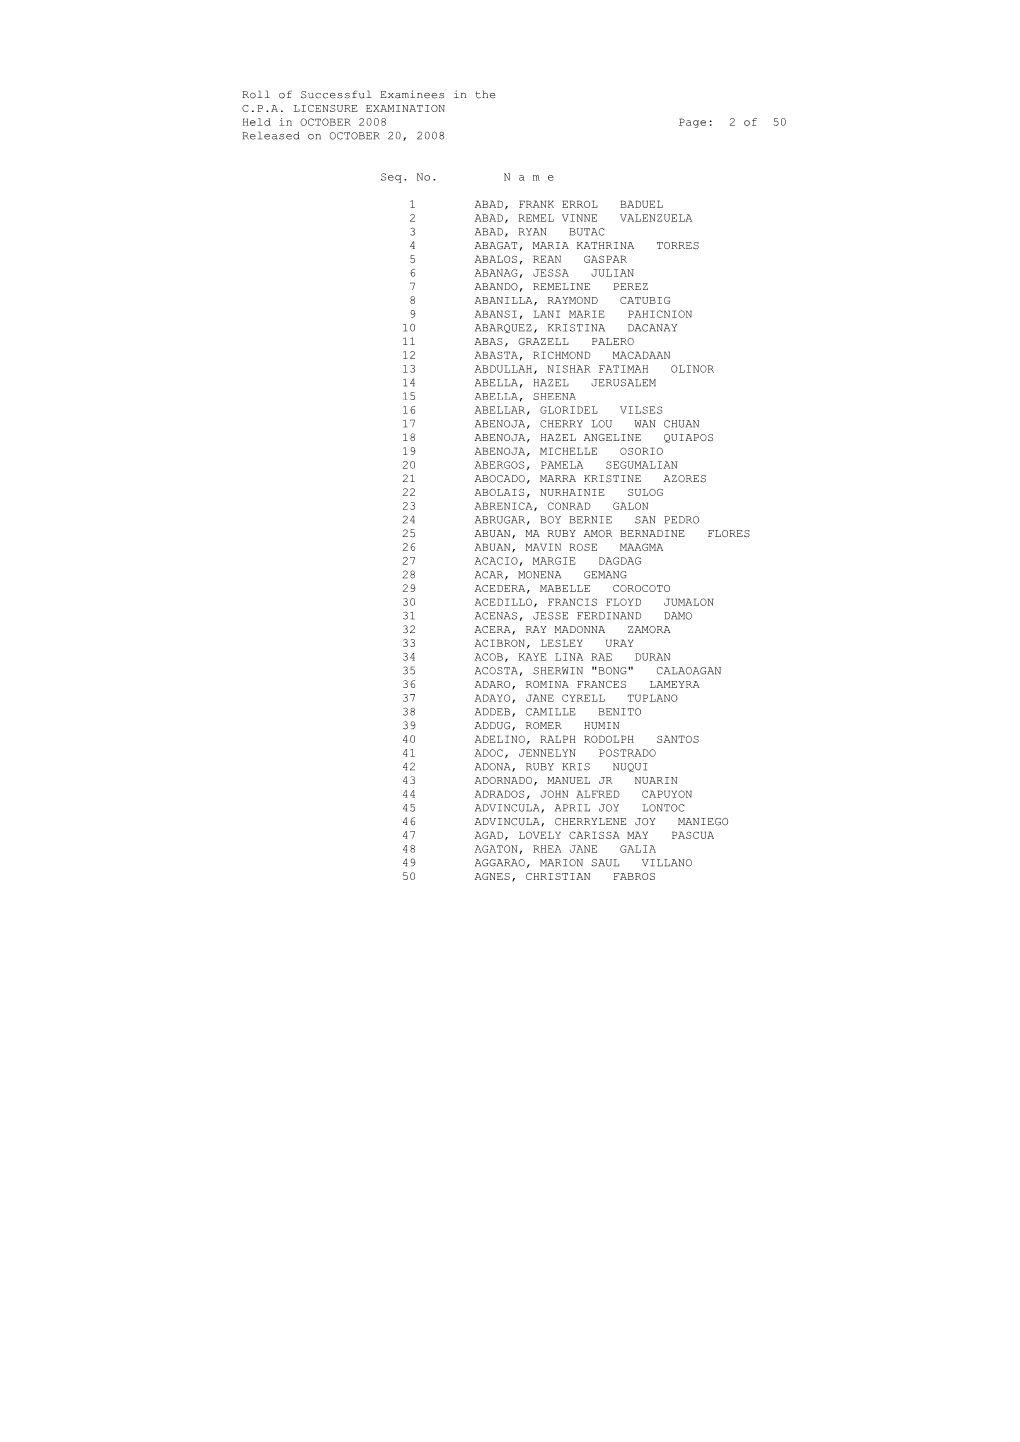 Roll of Successful Examinees in the CPA LICENSURE EXAMINATION Held in OCTOBER 2008 Page